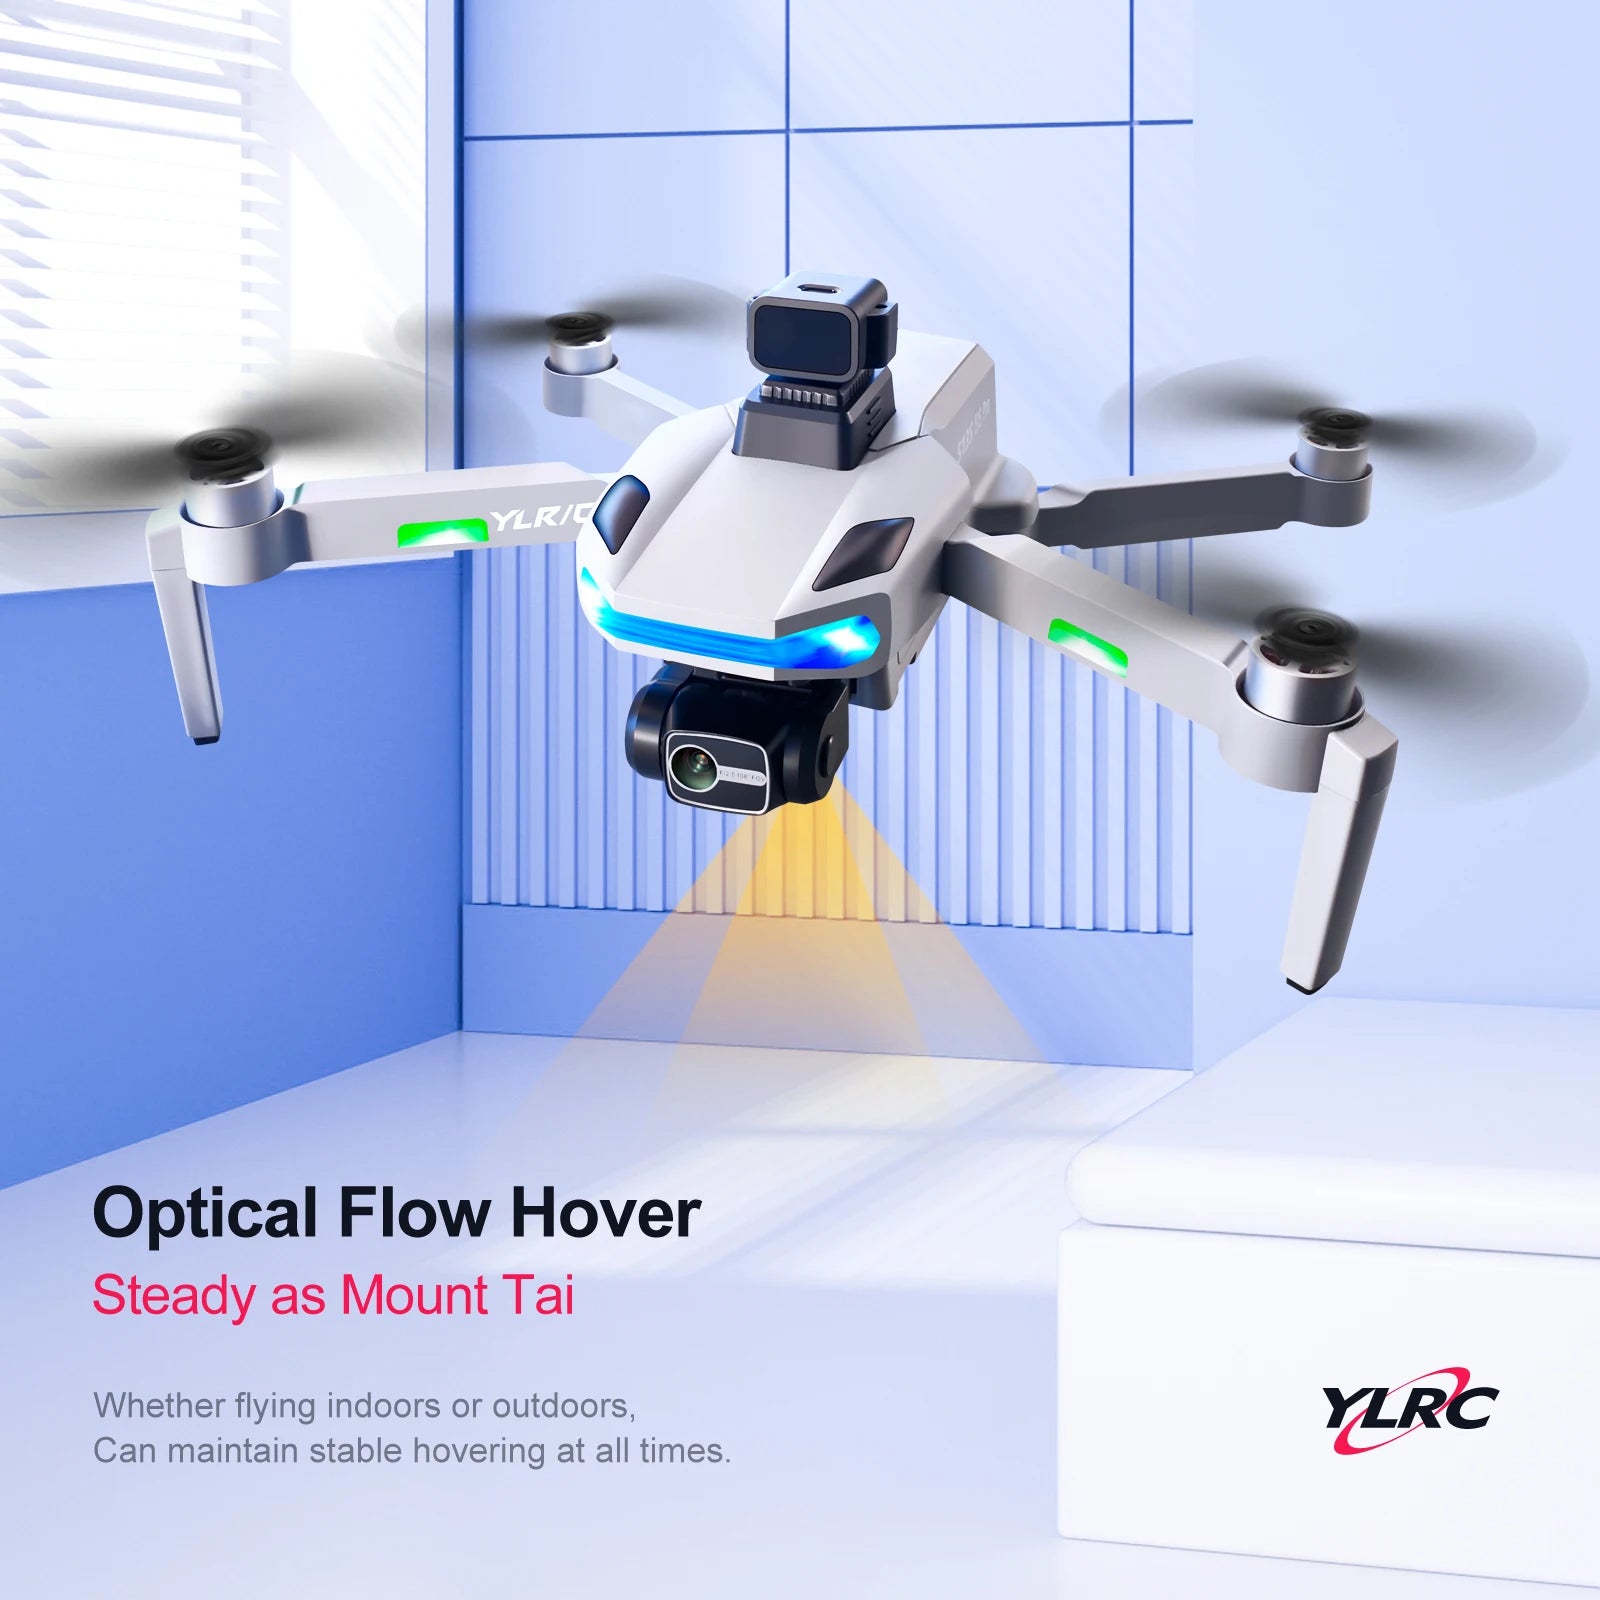 S135 Drone, YLRC Optical Flow Hover Steady as Mount Tai 